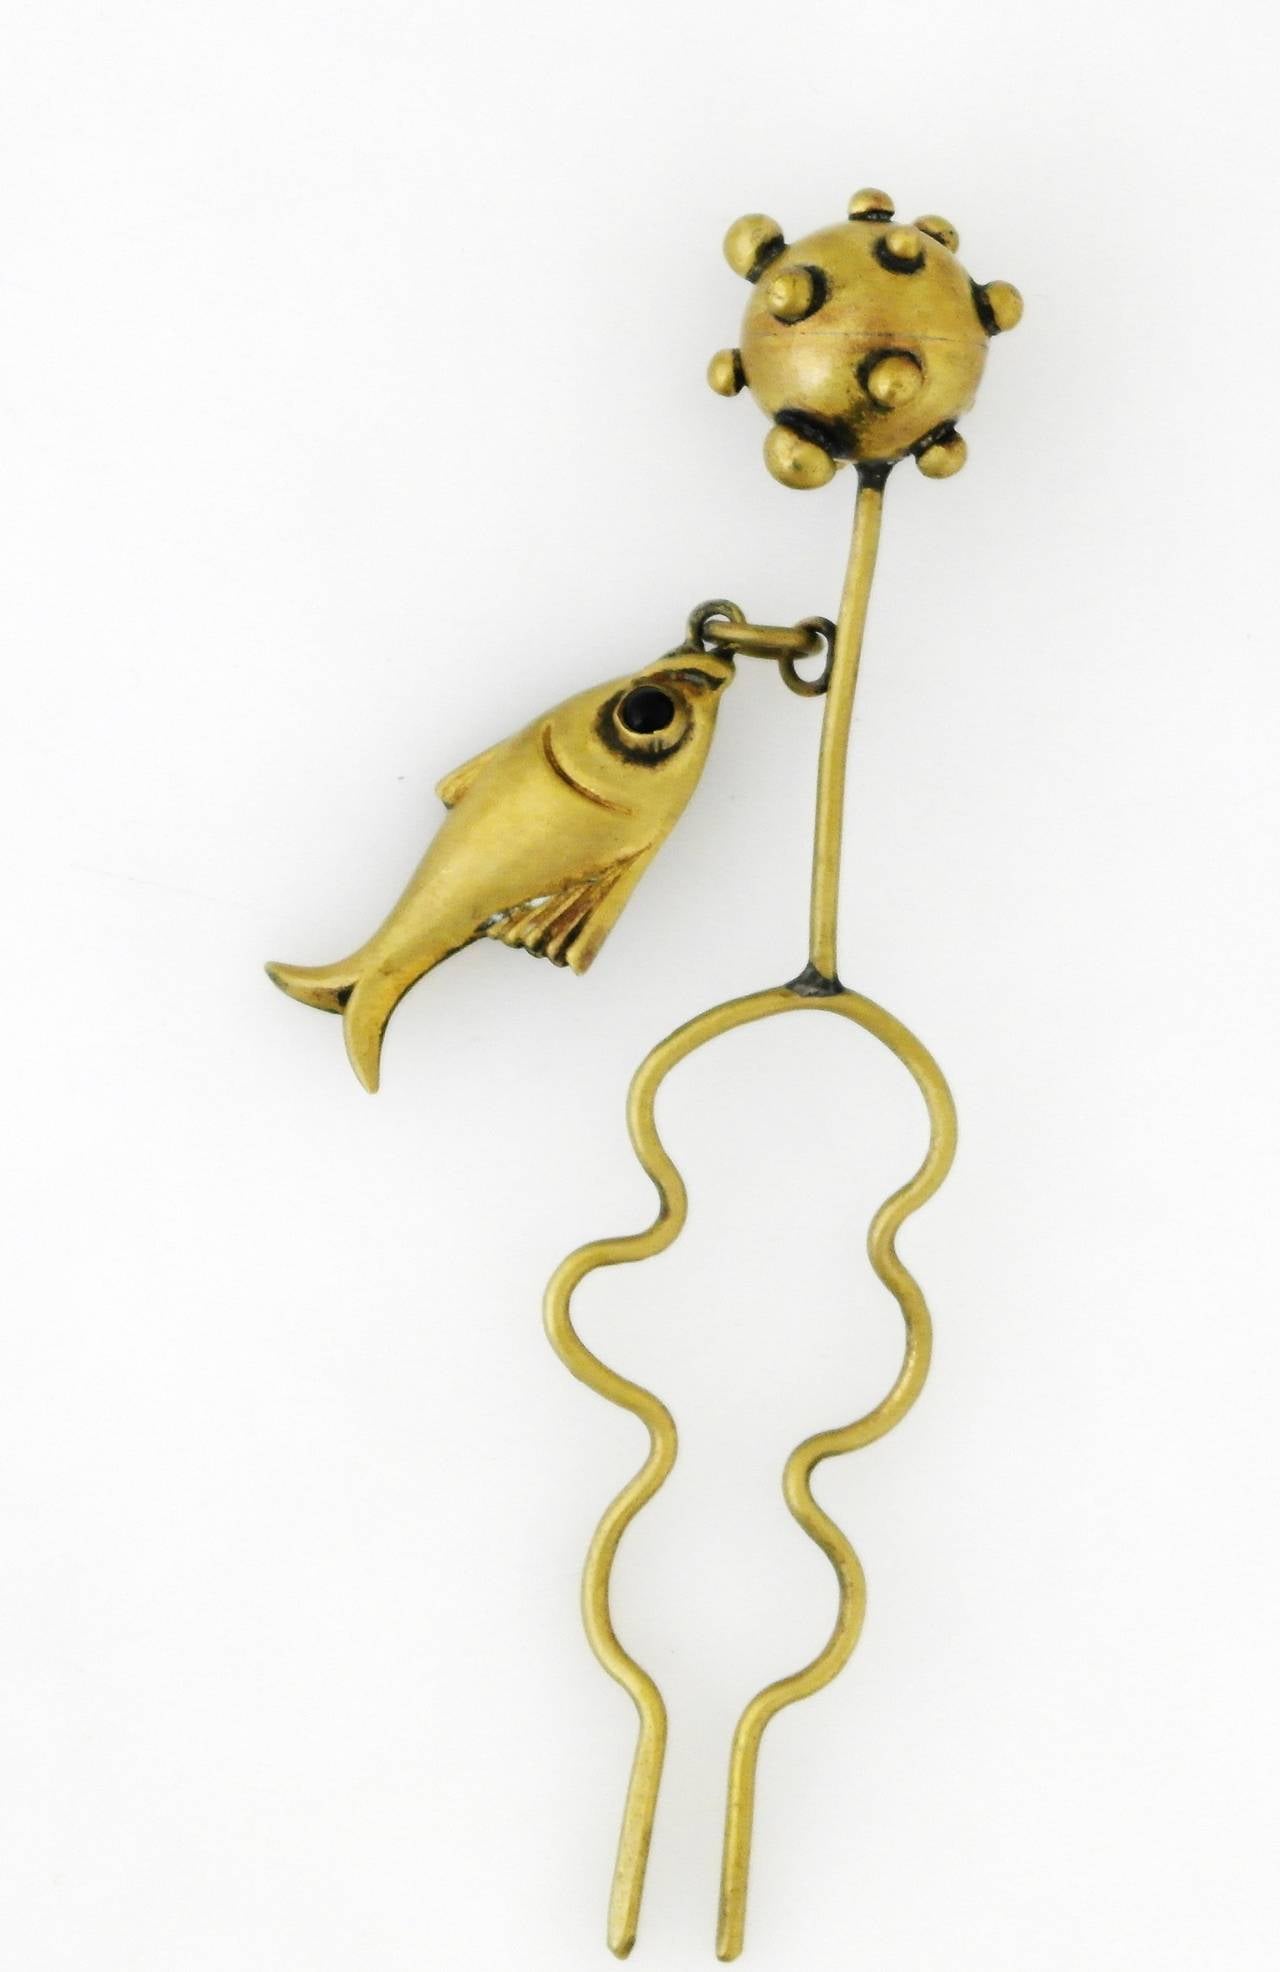 Being offered is a circa 1943 brass hair ornament by Hubert Harmon of Taxco, Mexico. Whimsical piece typical of Harmon's designs, comprising an atomic sphere finial with a dangling fish. Dimensions: 5 1/2